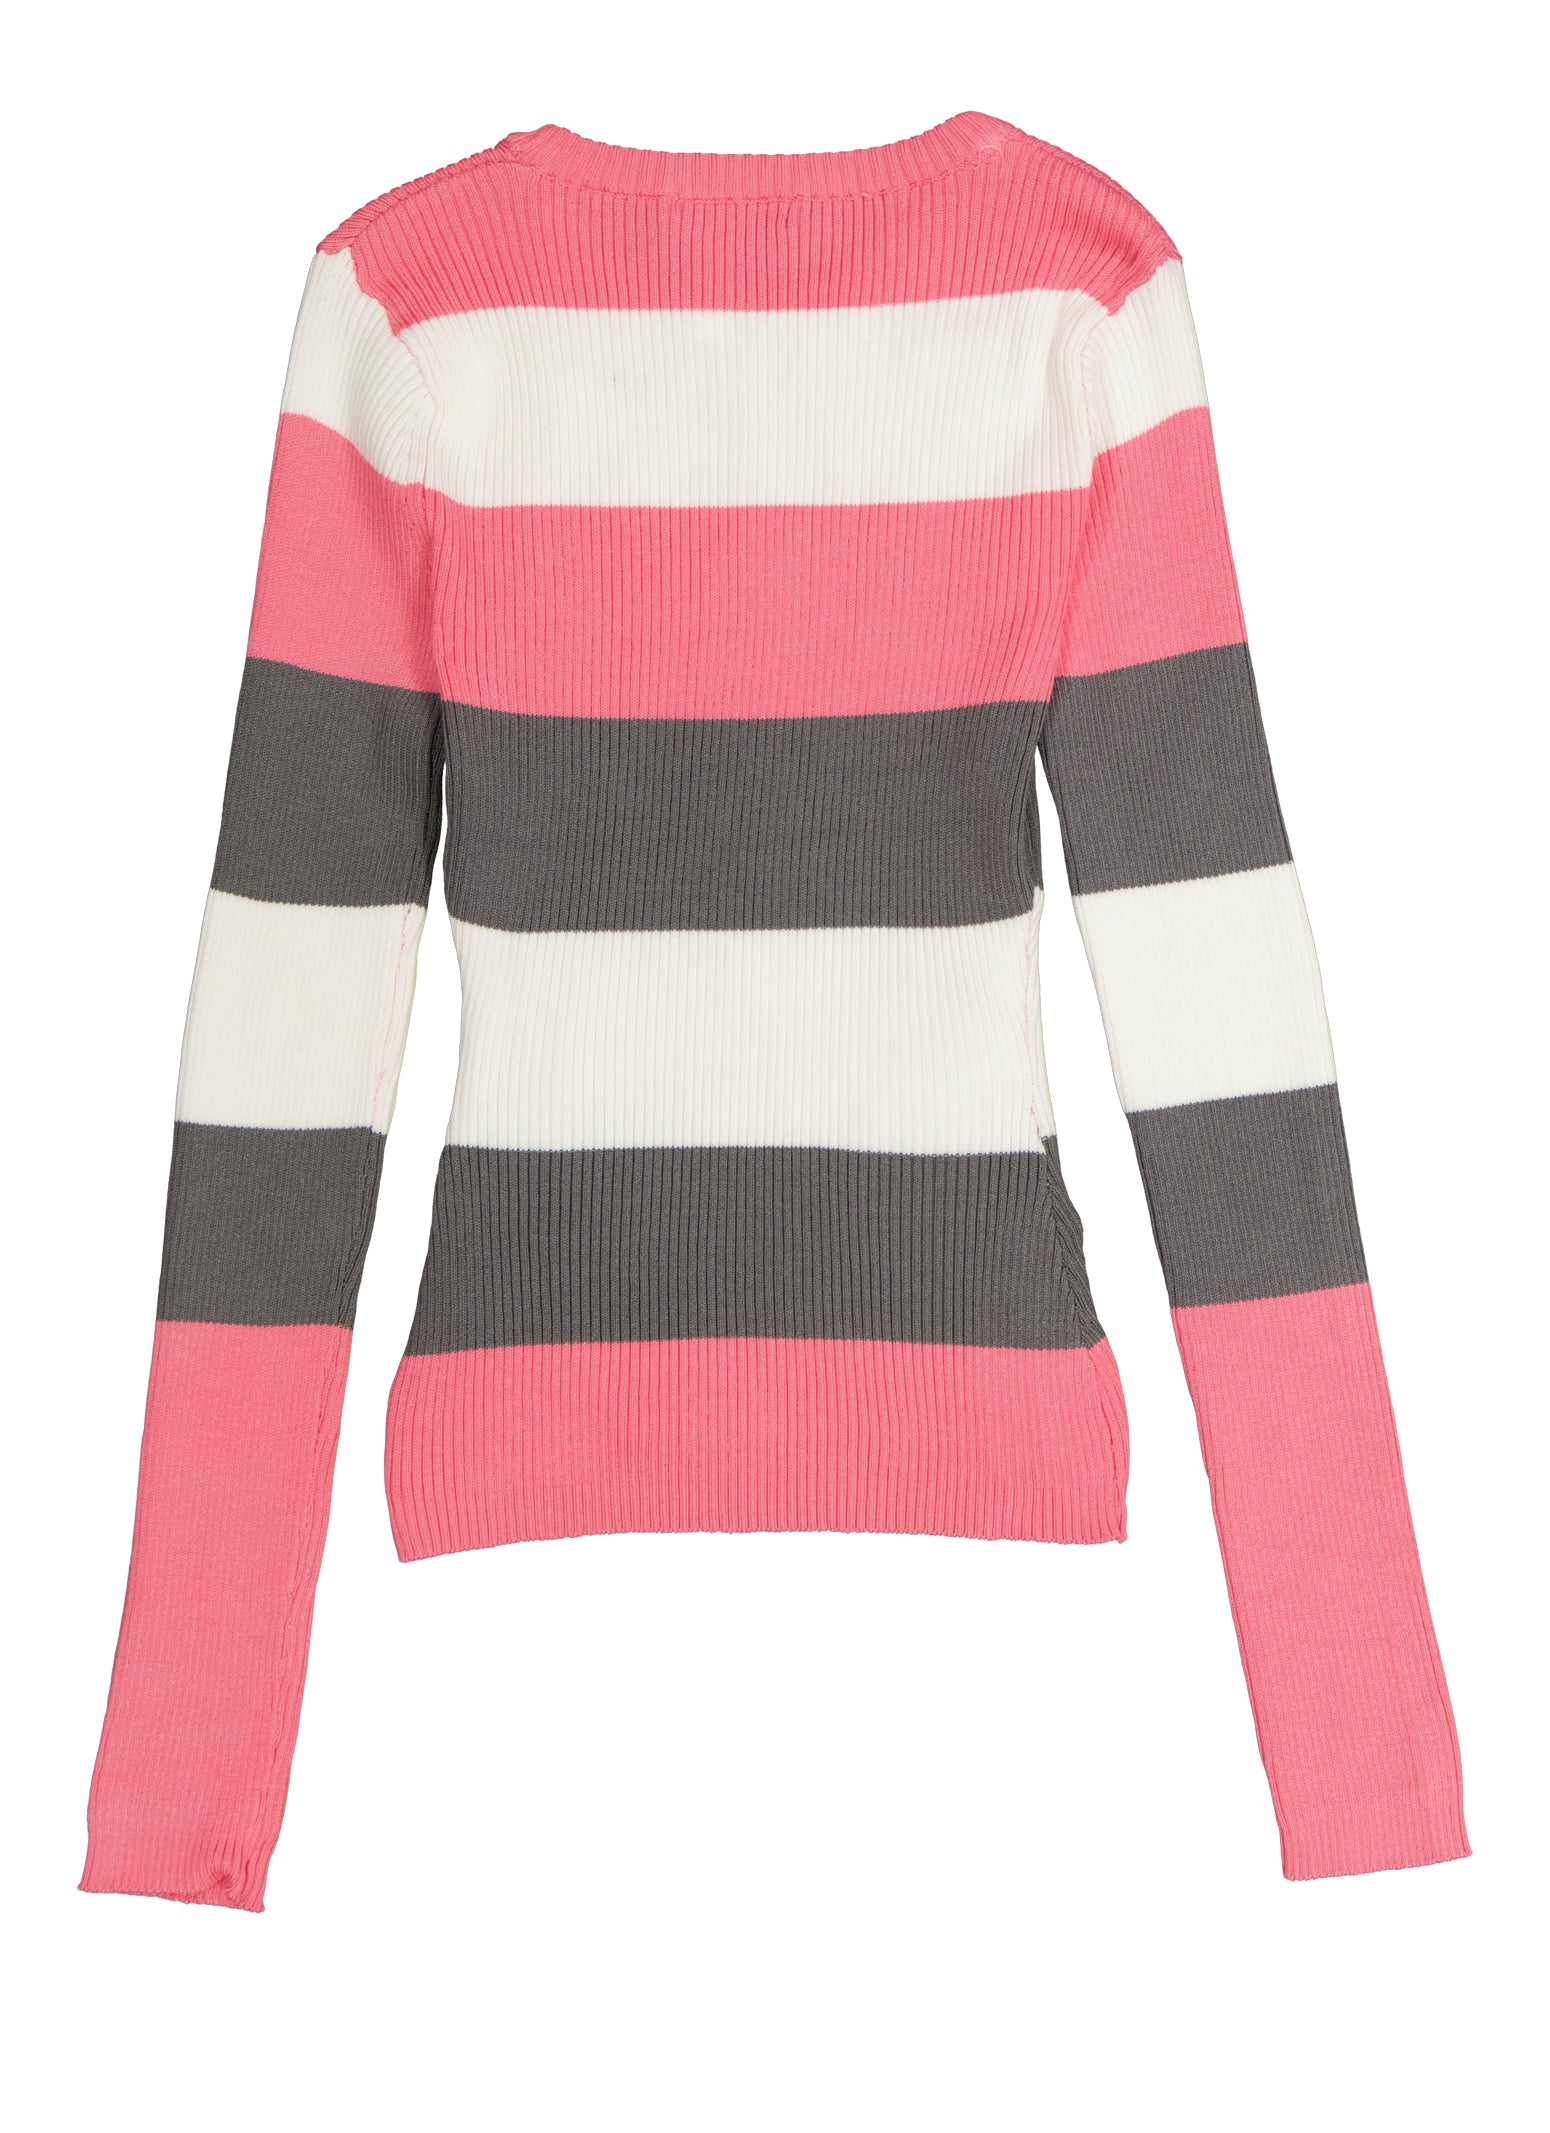 Girls Ribbed Knit Color Blocked Striped Sweater